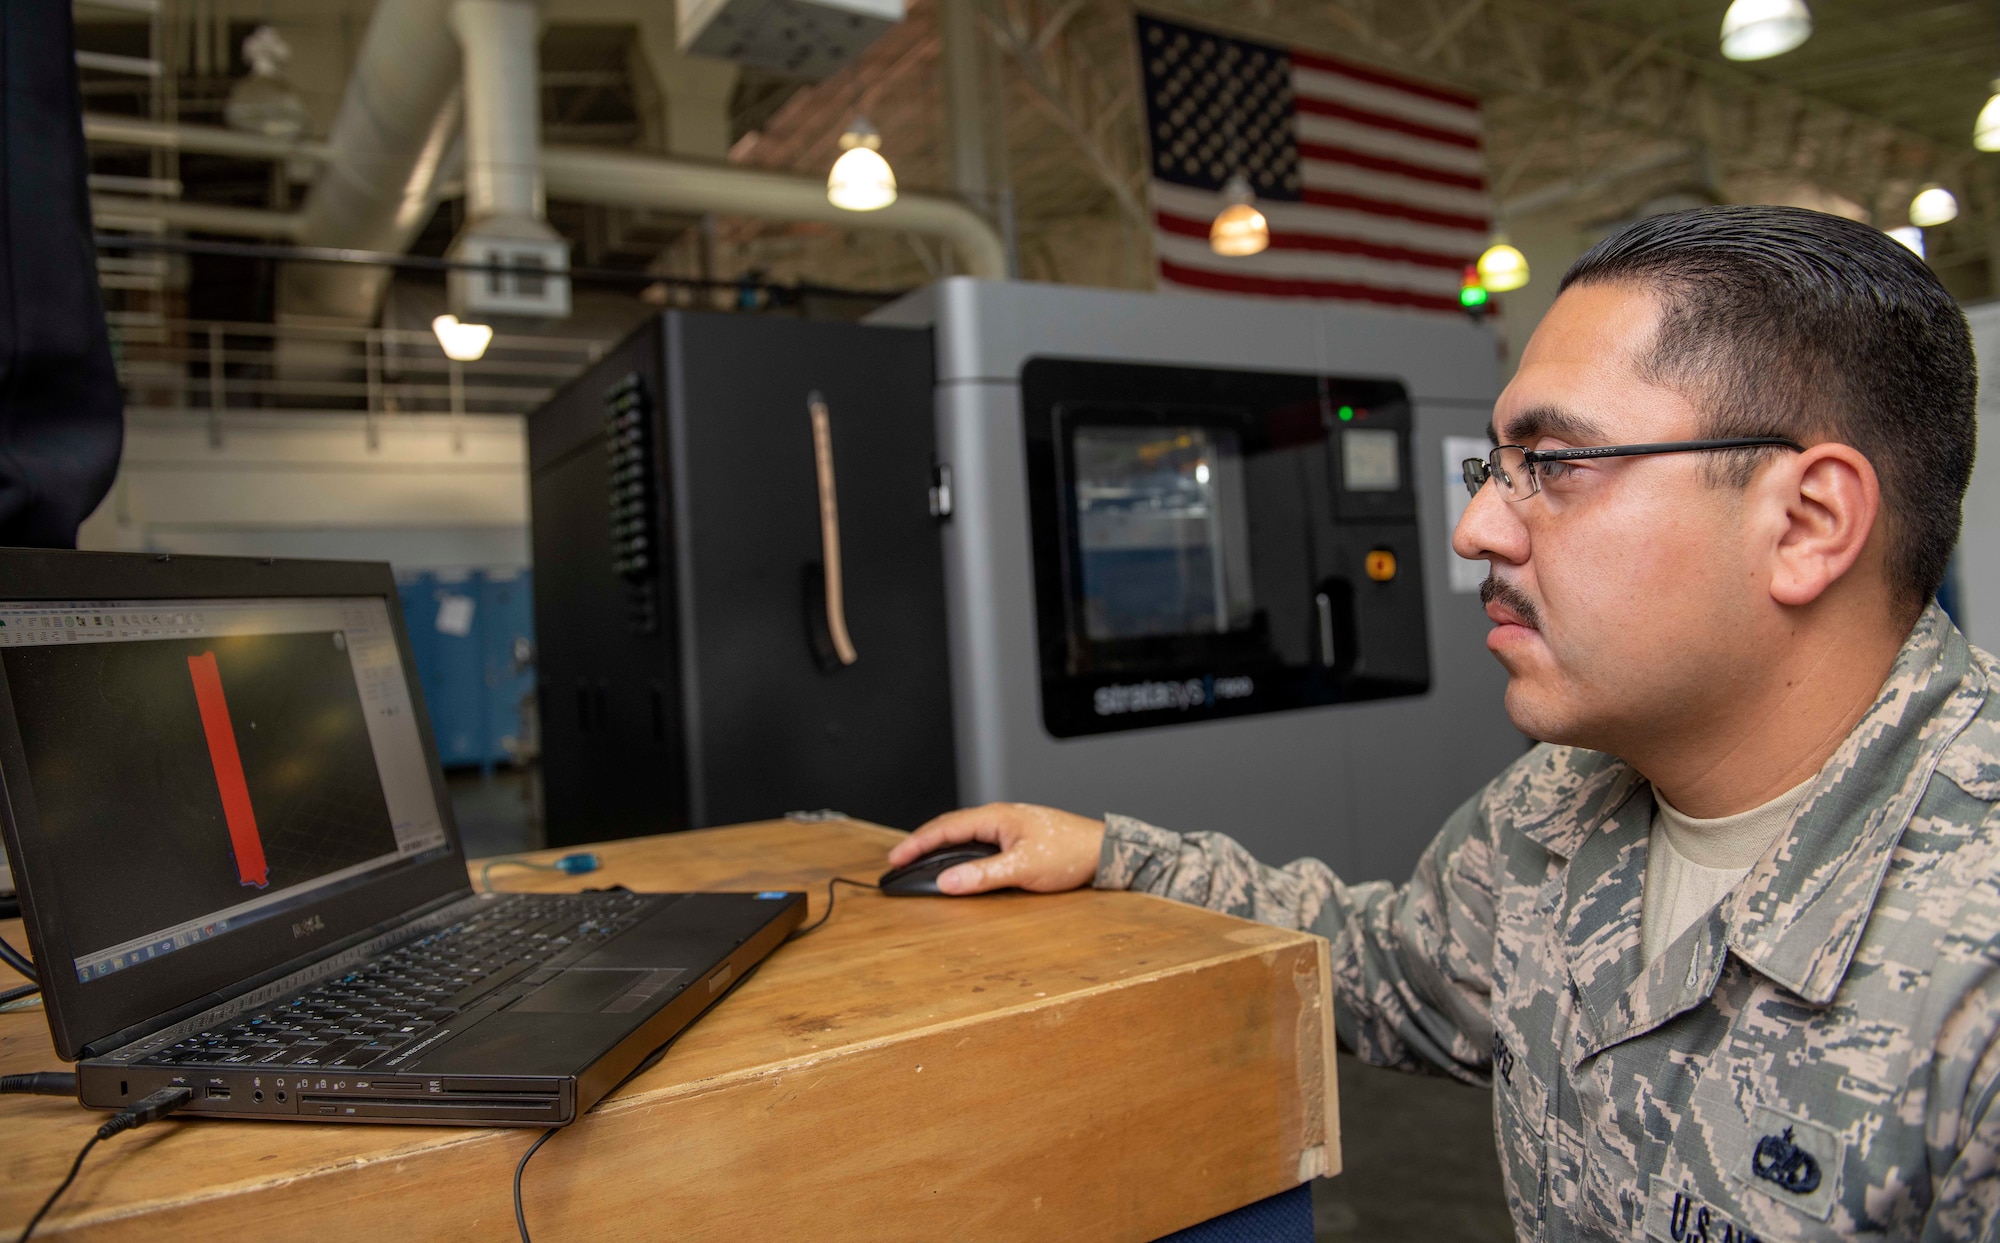 Travis AFB is the first field-unit location in the Air Force to have the Stratays F900 3-D industrial printer certified by the Federal Aviation Administration and Air Force Advanced Technology and Training Center for use on aircraft replacement parts. (U.S. Air Force photo by Louis Briscese)